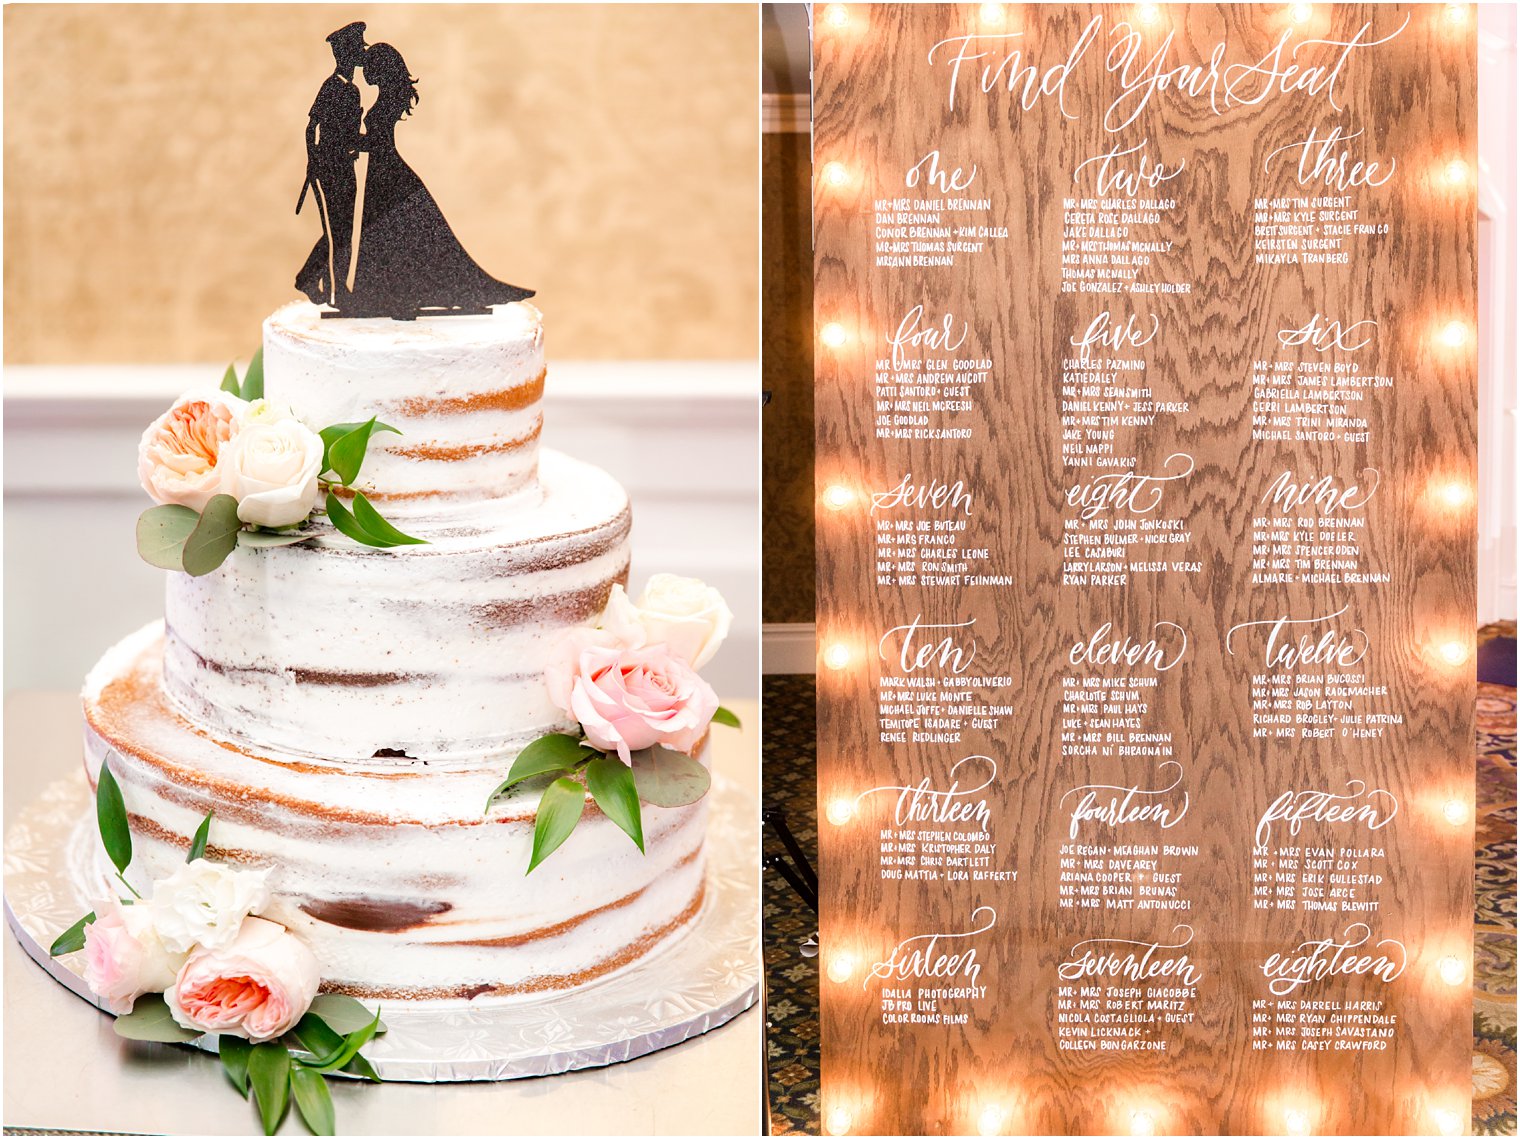 photo of cake and wooden seating chart